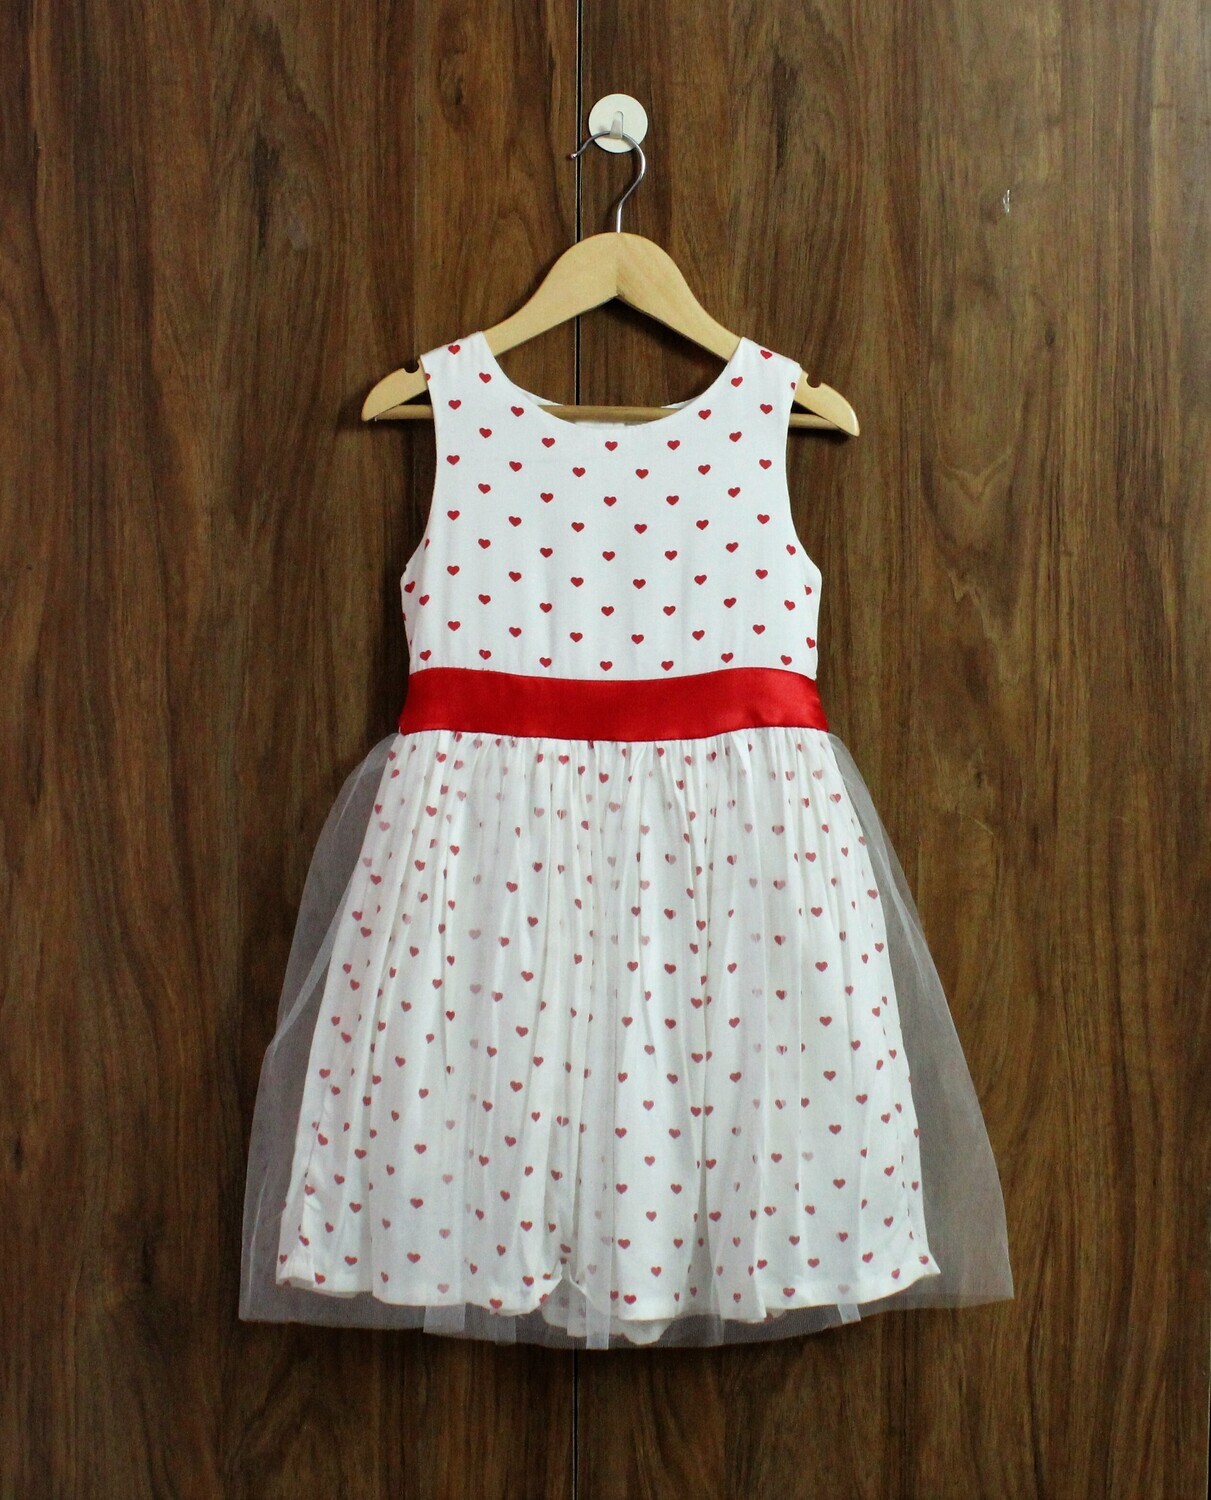 Red heart party dress(4 to 12 Yrs.)